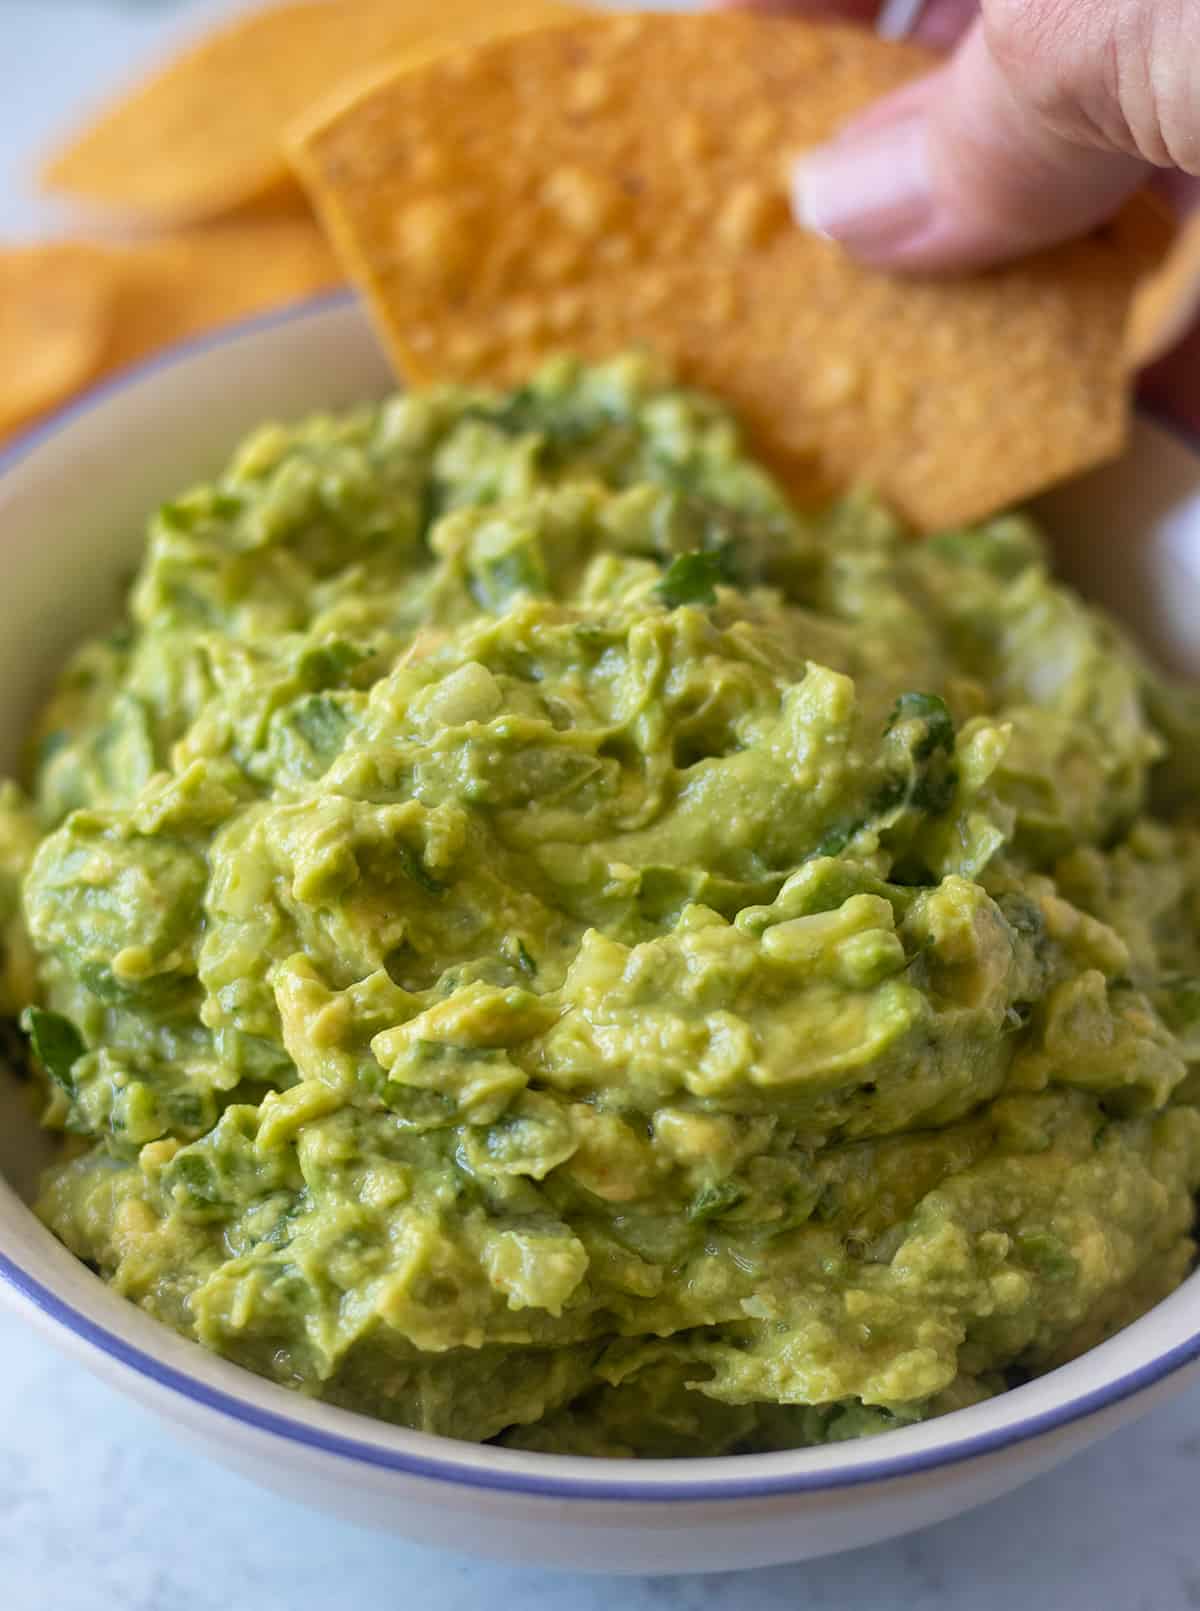 guacamole being in a white bowl with blue trim being scooped out with a tortilla chip